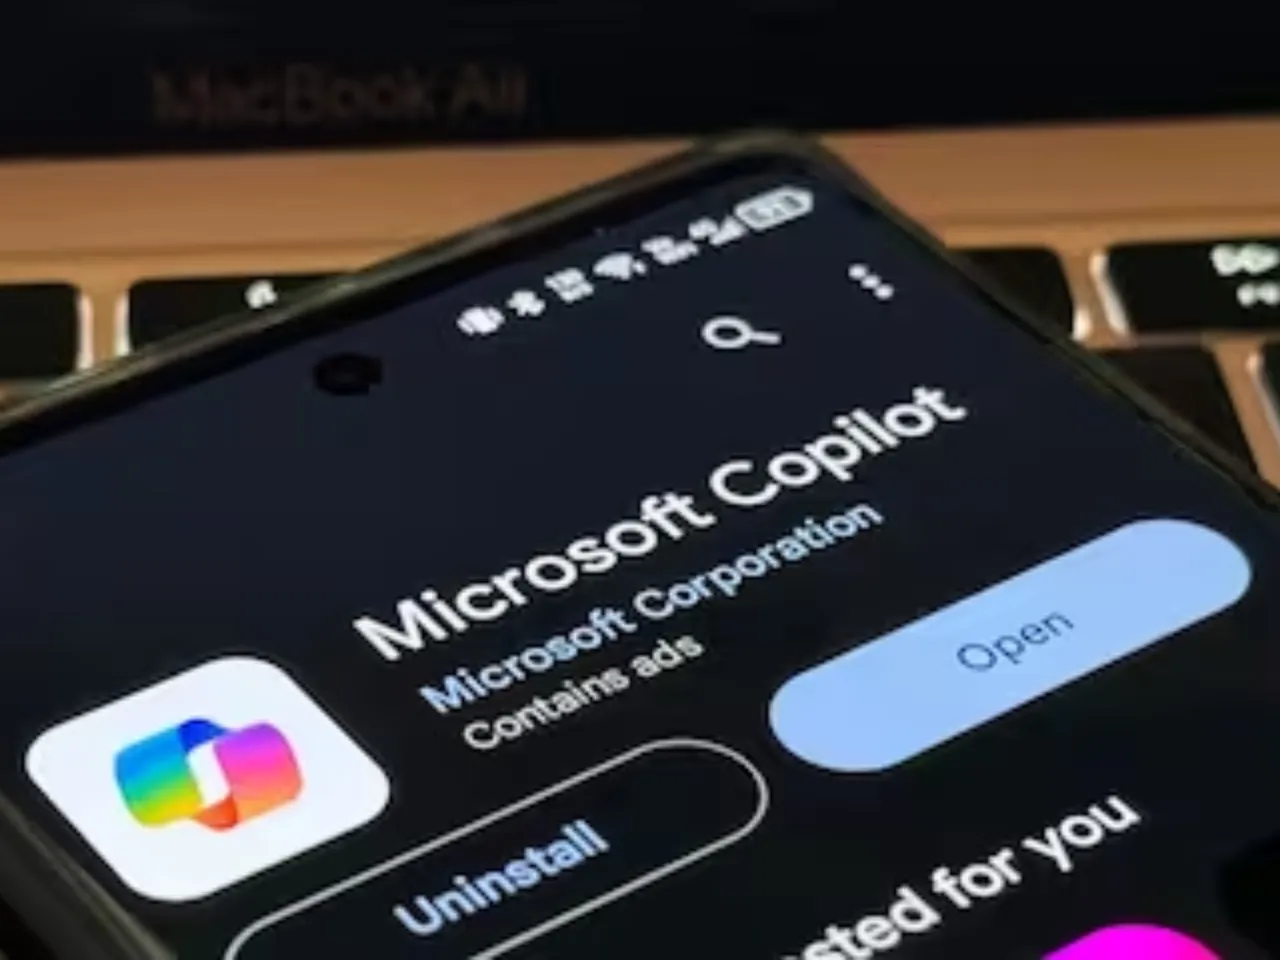 Microsoft Copilot is now available as an app on Android